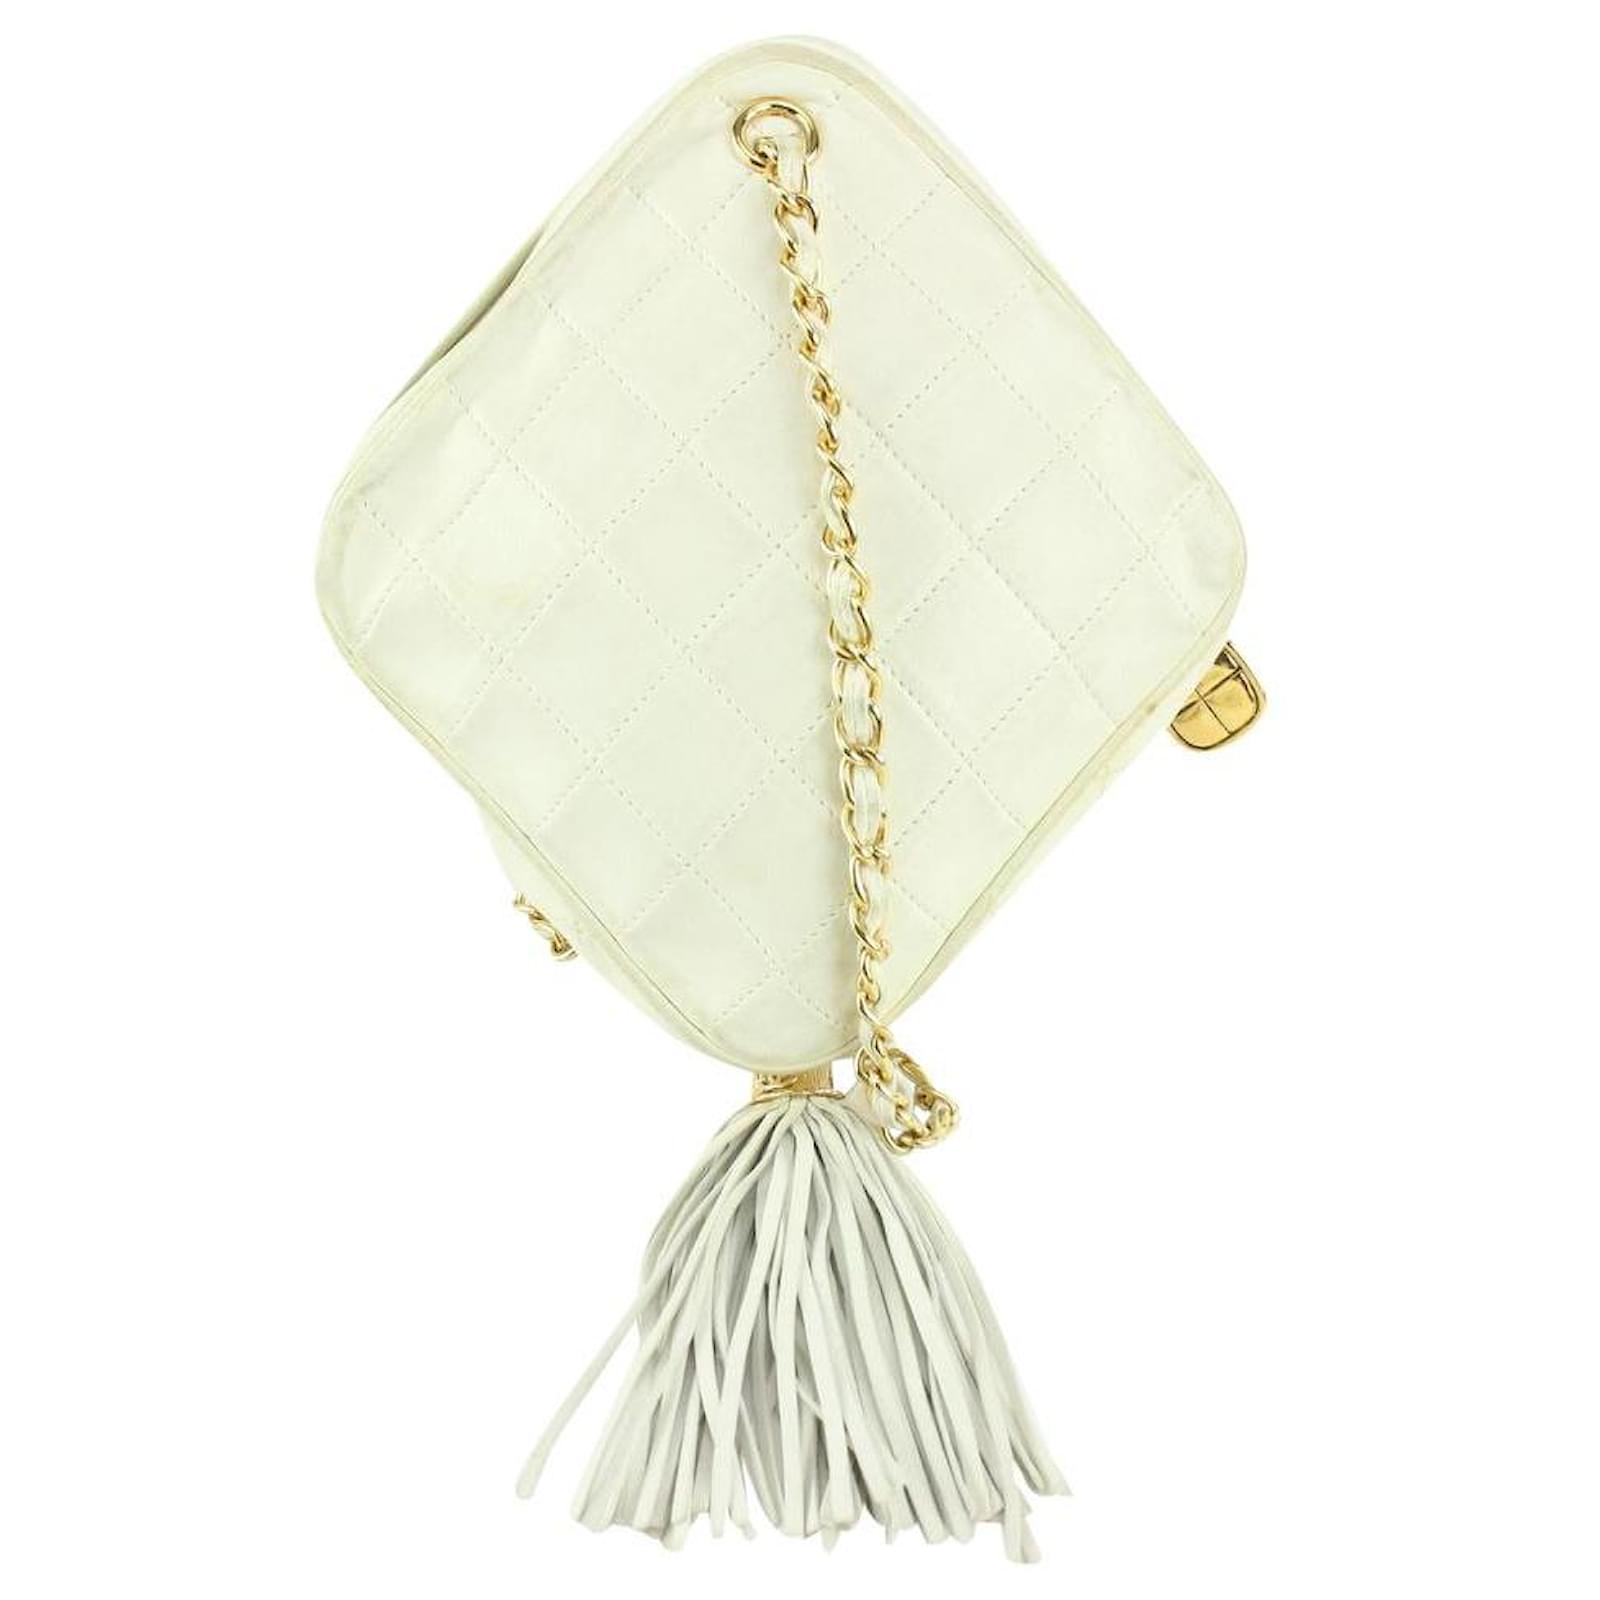 Chanel White Quilted Leather Diamond Clutch on Chain Tassel Bag